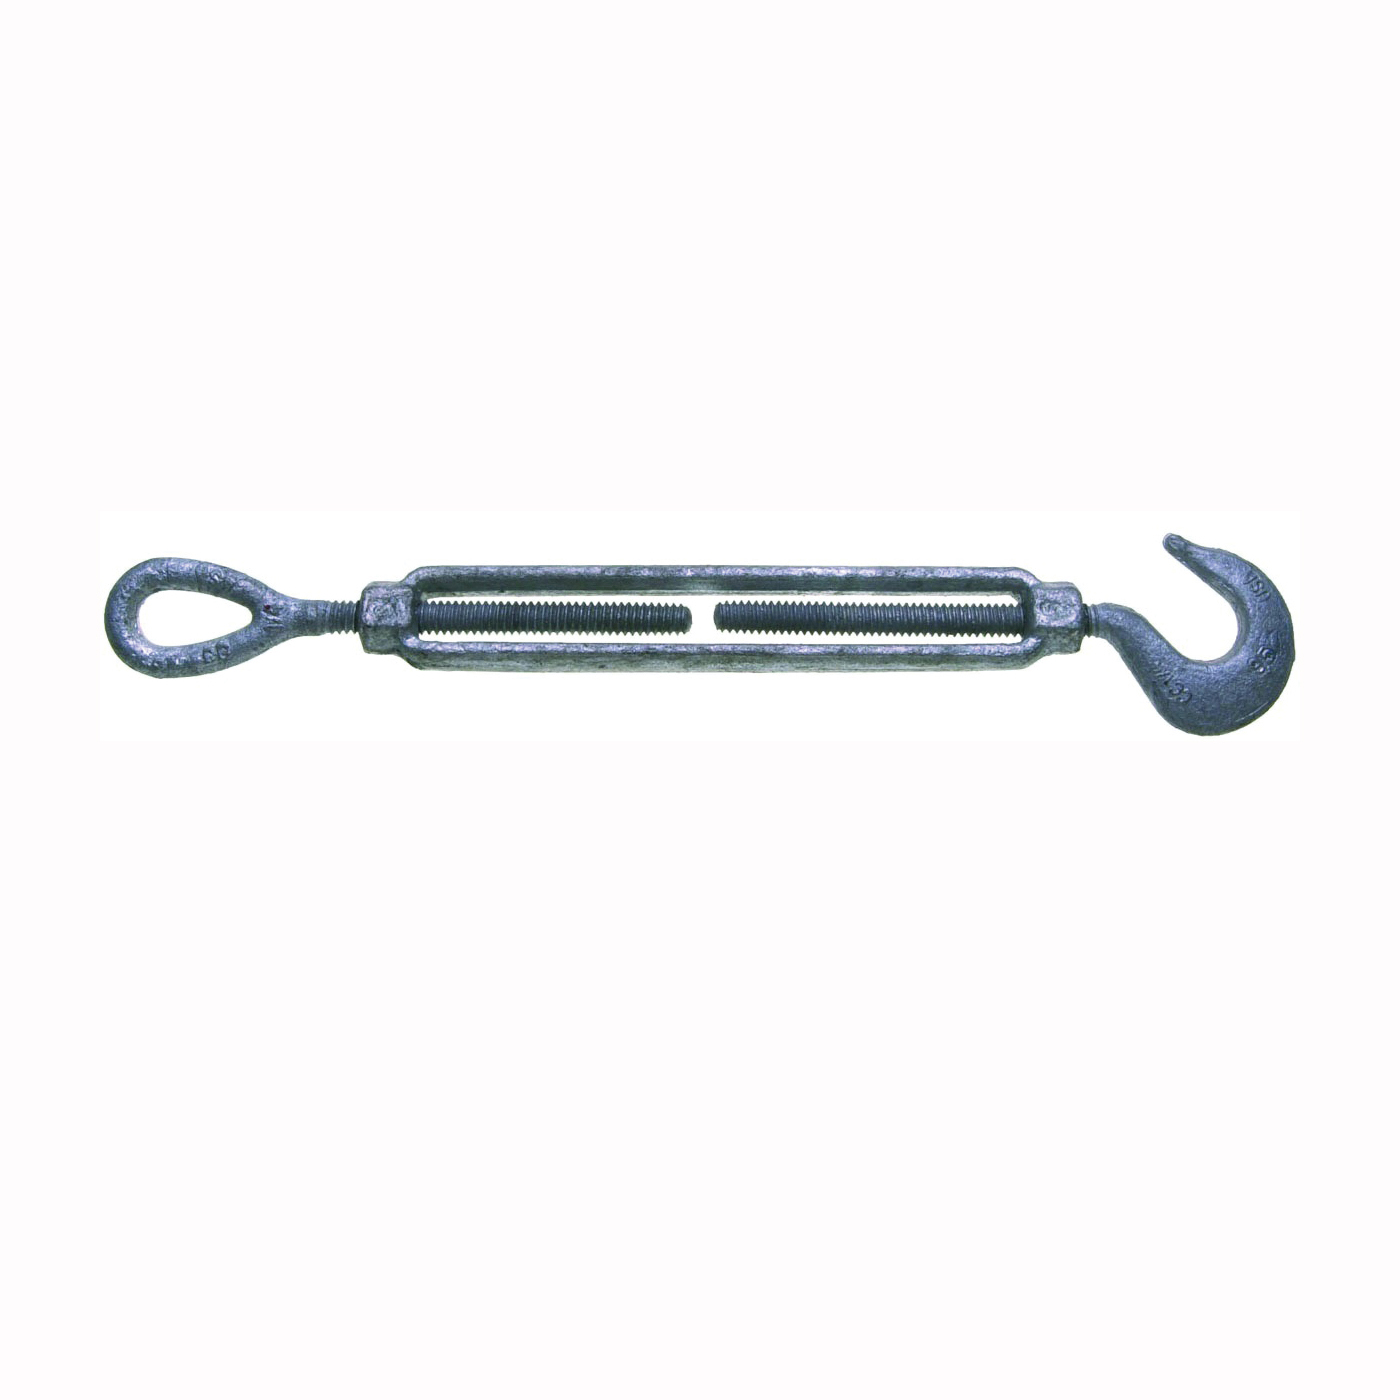 BARON 16-3/4X9 Turnbuckle, 3000 lb Working Load, 3/4 in Thread, Hook, Eye, 9 in L Take-Up, Galvanized Steel